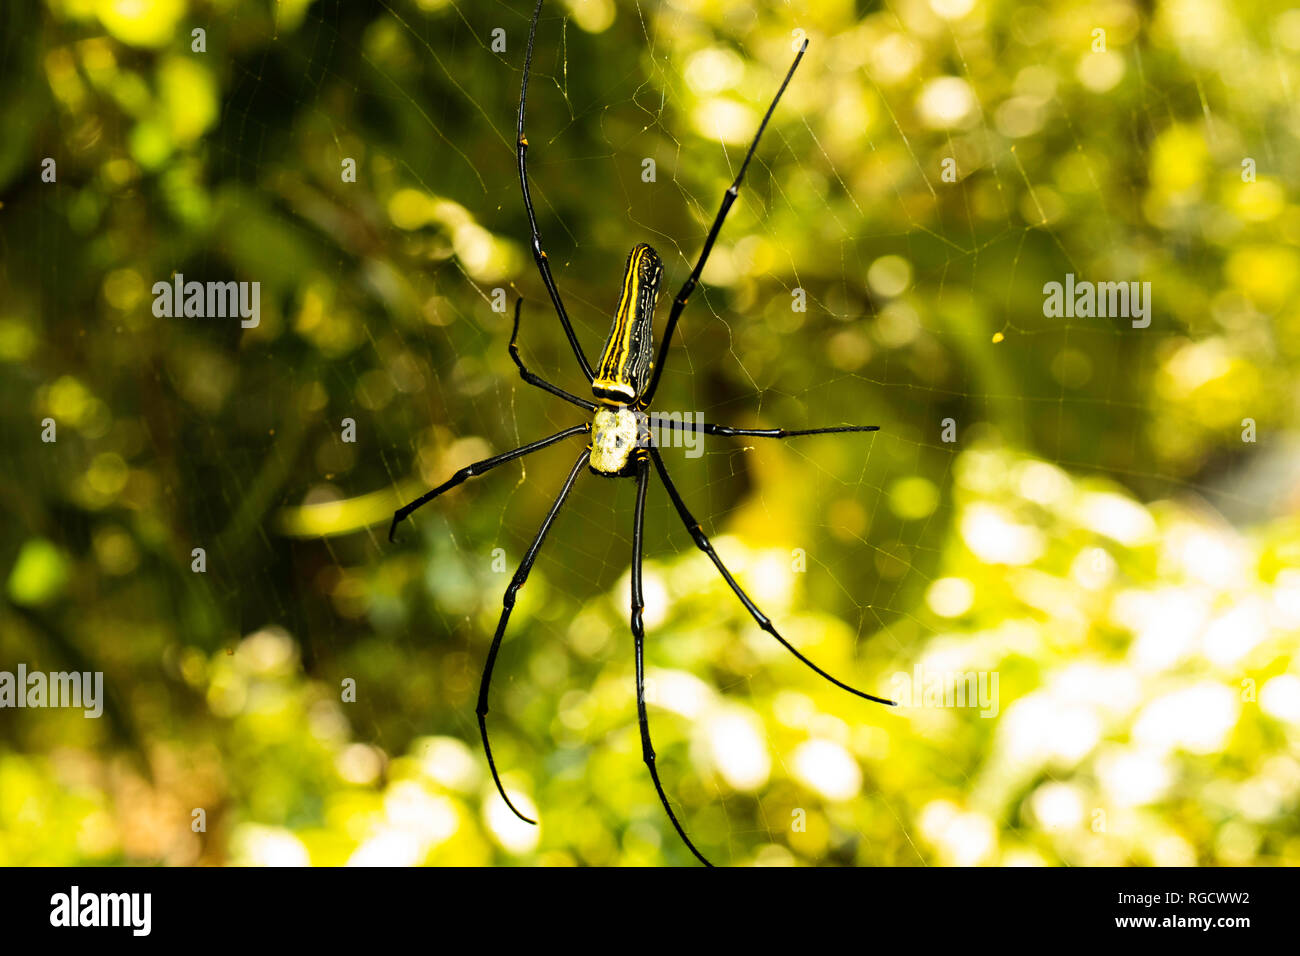 A close-up image of a big spider poised on its web, ready to trap insects, in the morning light. Stock Photo